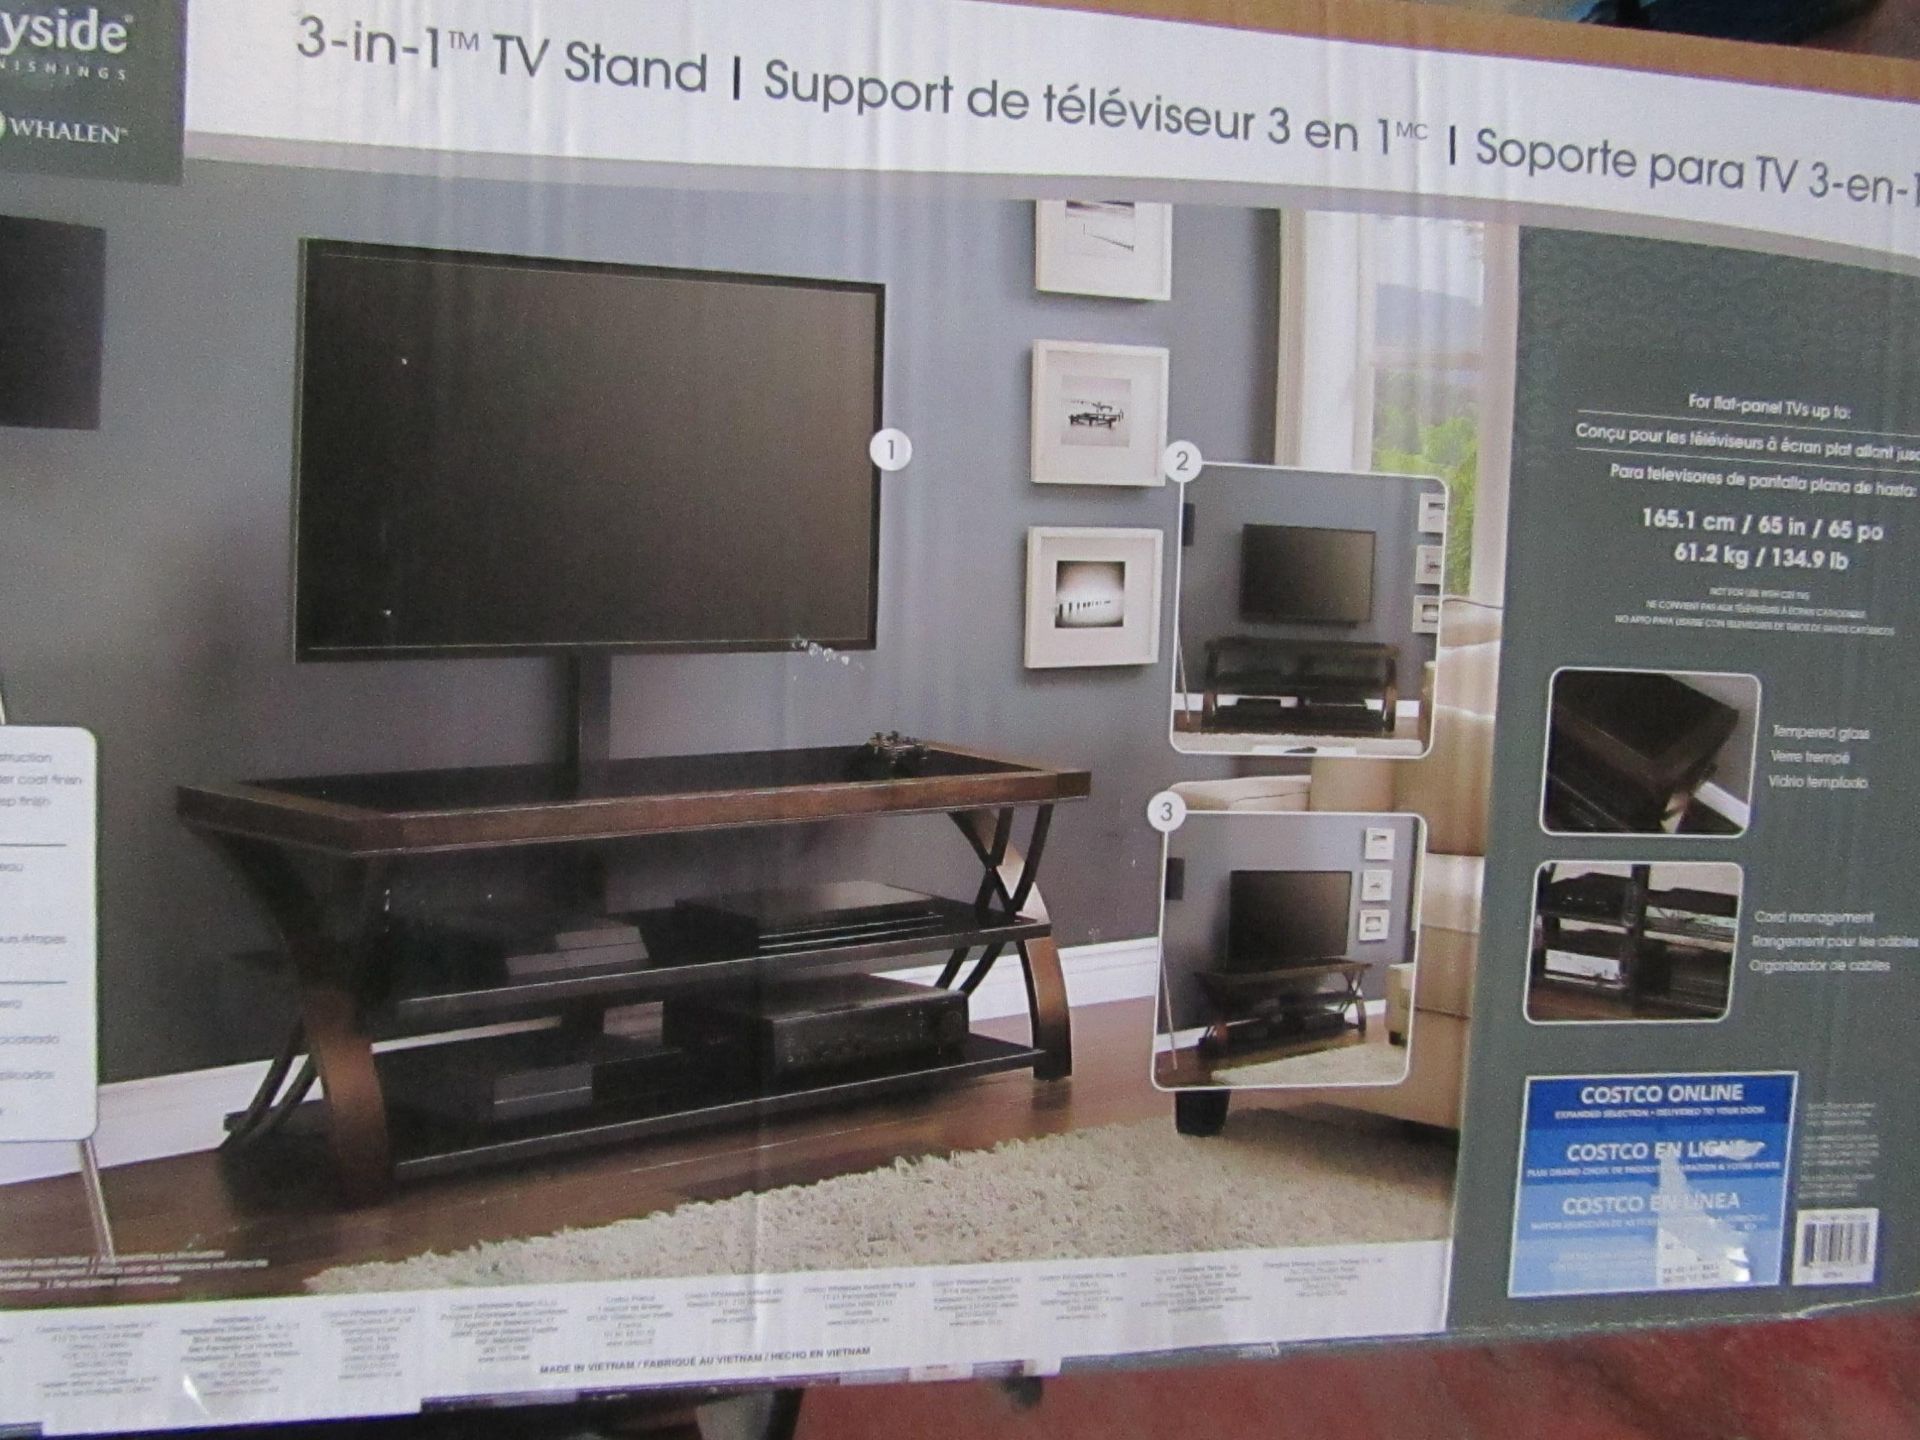 Bayside 3 in 1 TV stand, unchecked and boxed.